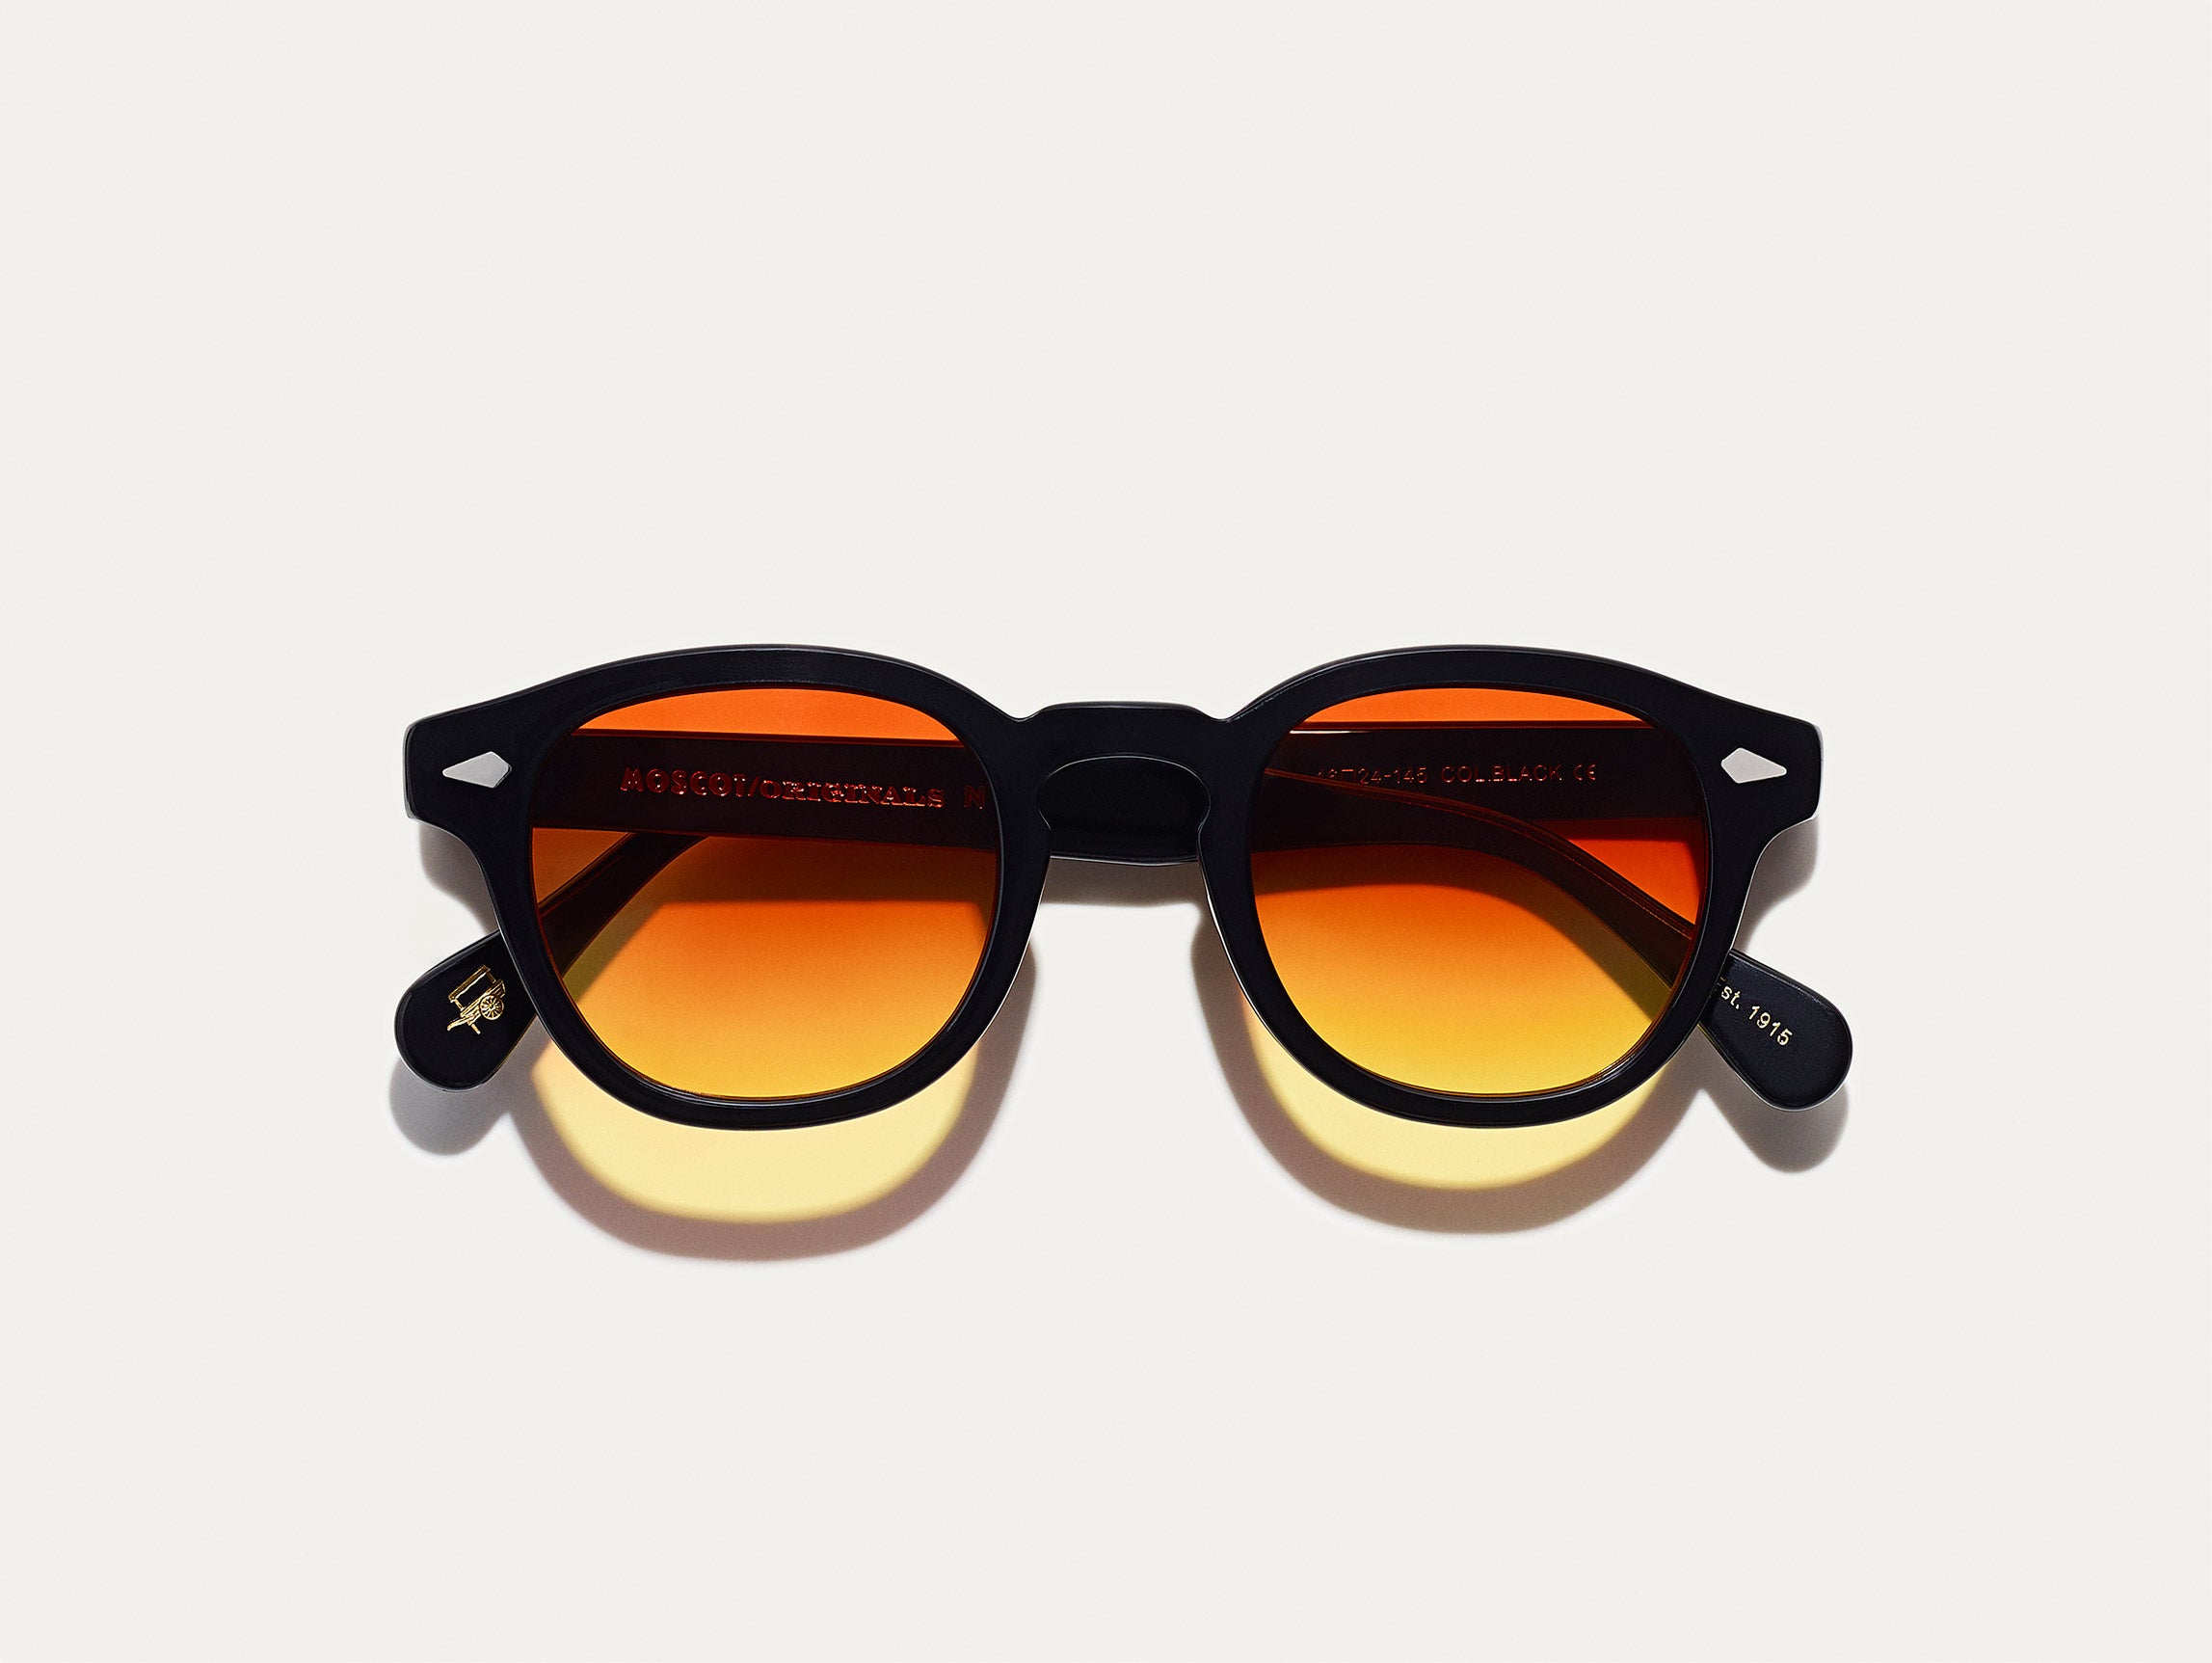 #color_candy corn | The LEMTOSH Black with Candy Corn Tinted Lenses